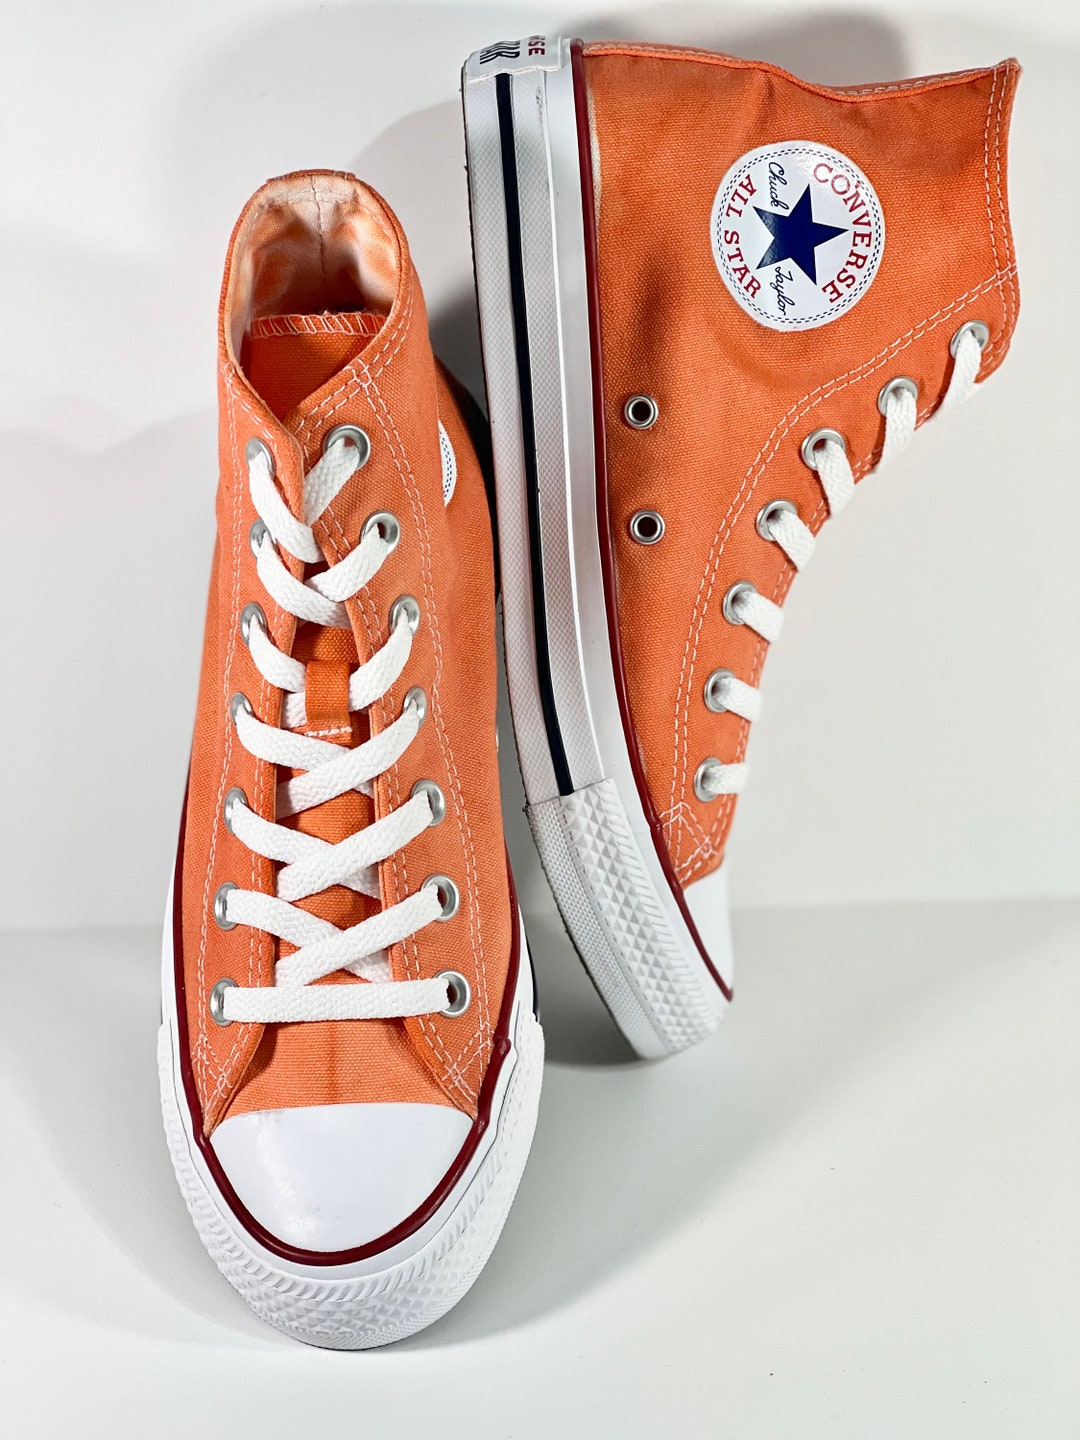 Solid Orange Converse All Star High Tops Shoes - Etsy